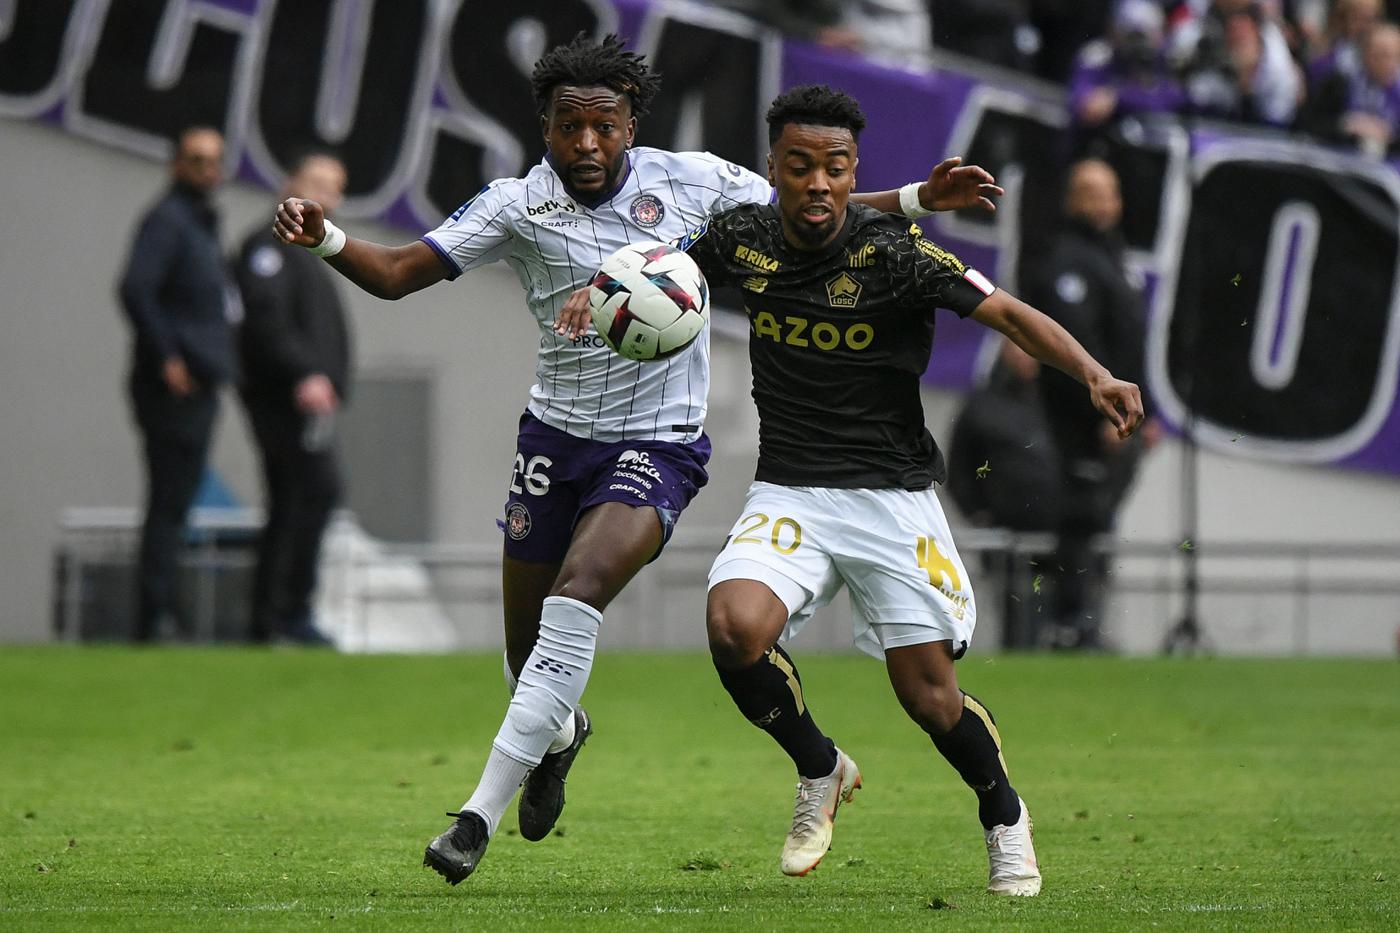 Toulouse - Lille - 0:2. French Championship, round 28. Match review, statistics.